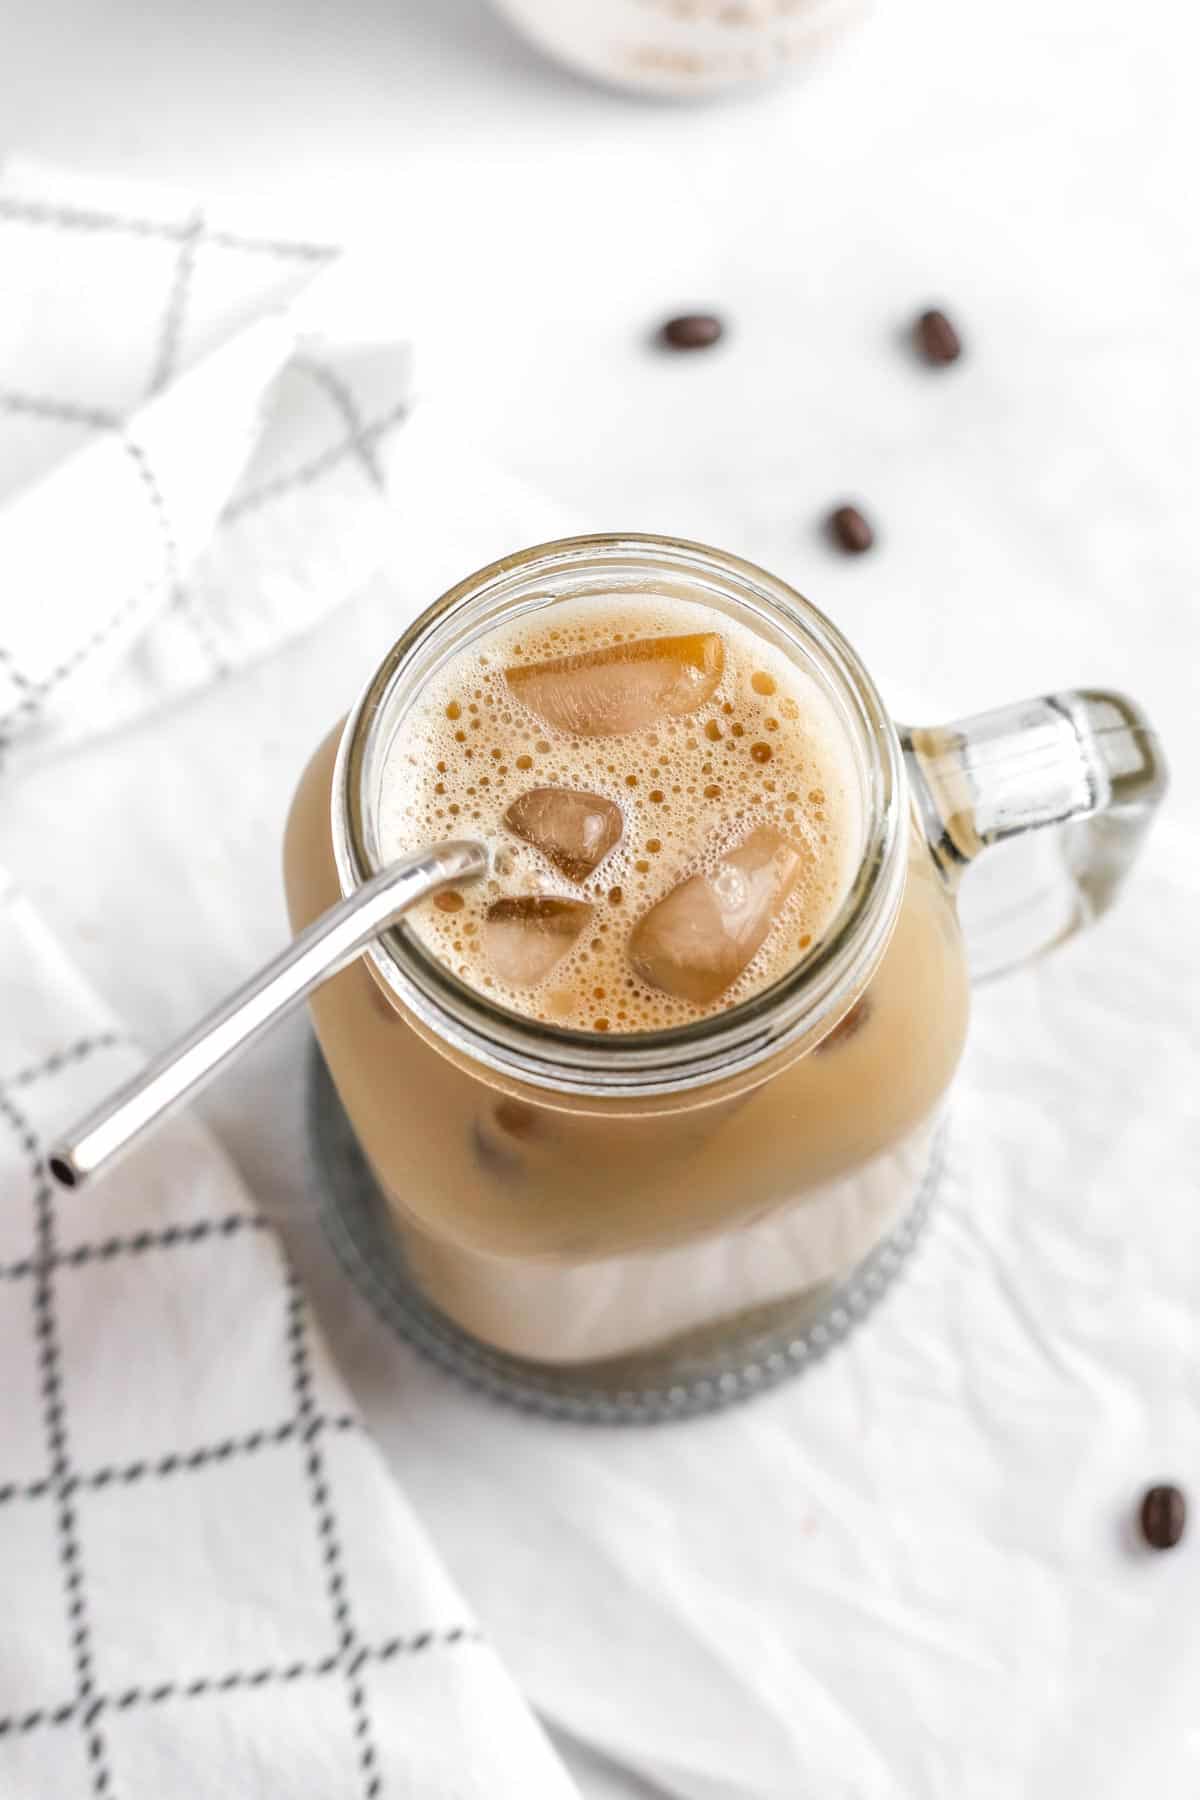 An overhead view of iced coffee in a glass with a stainless steel straw.